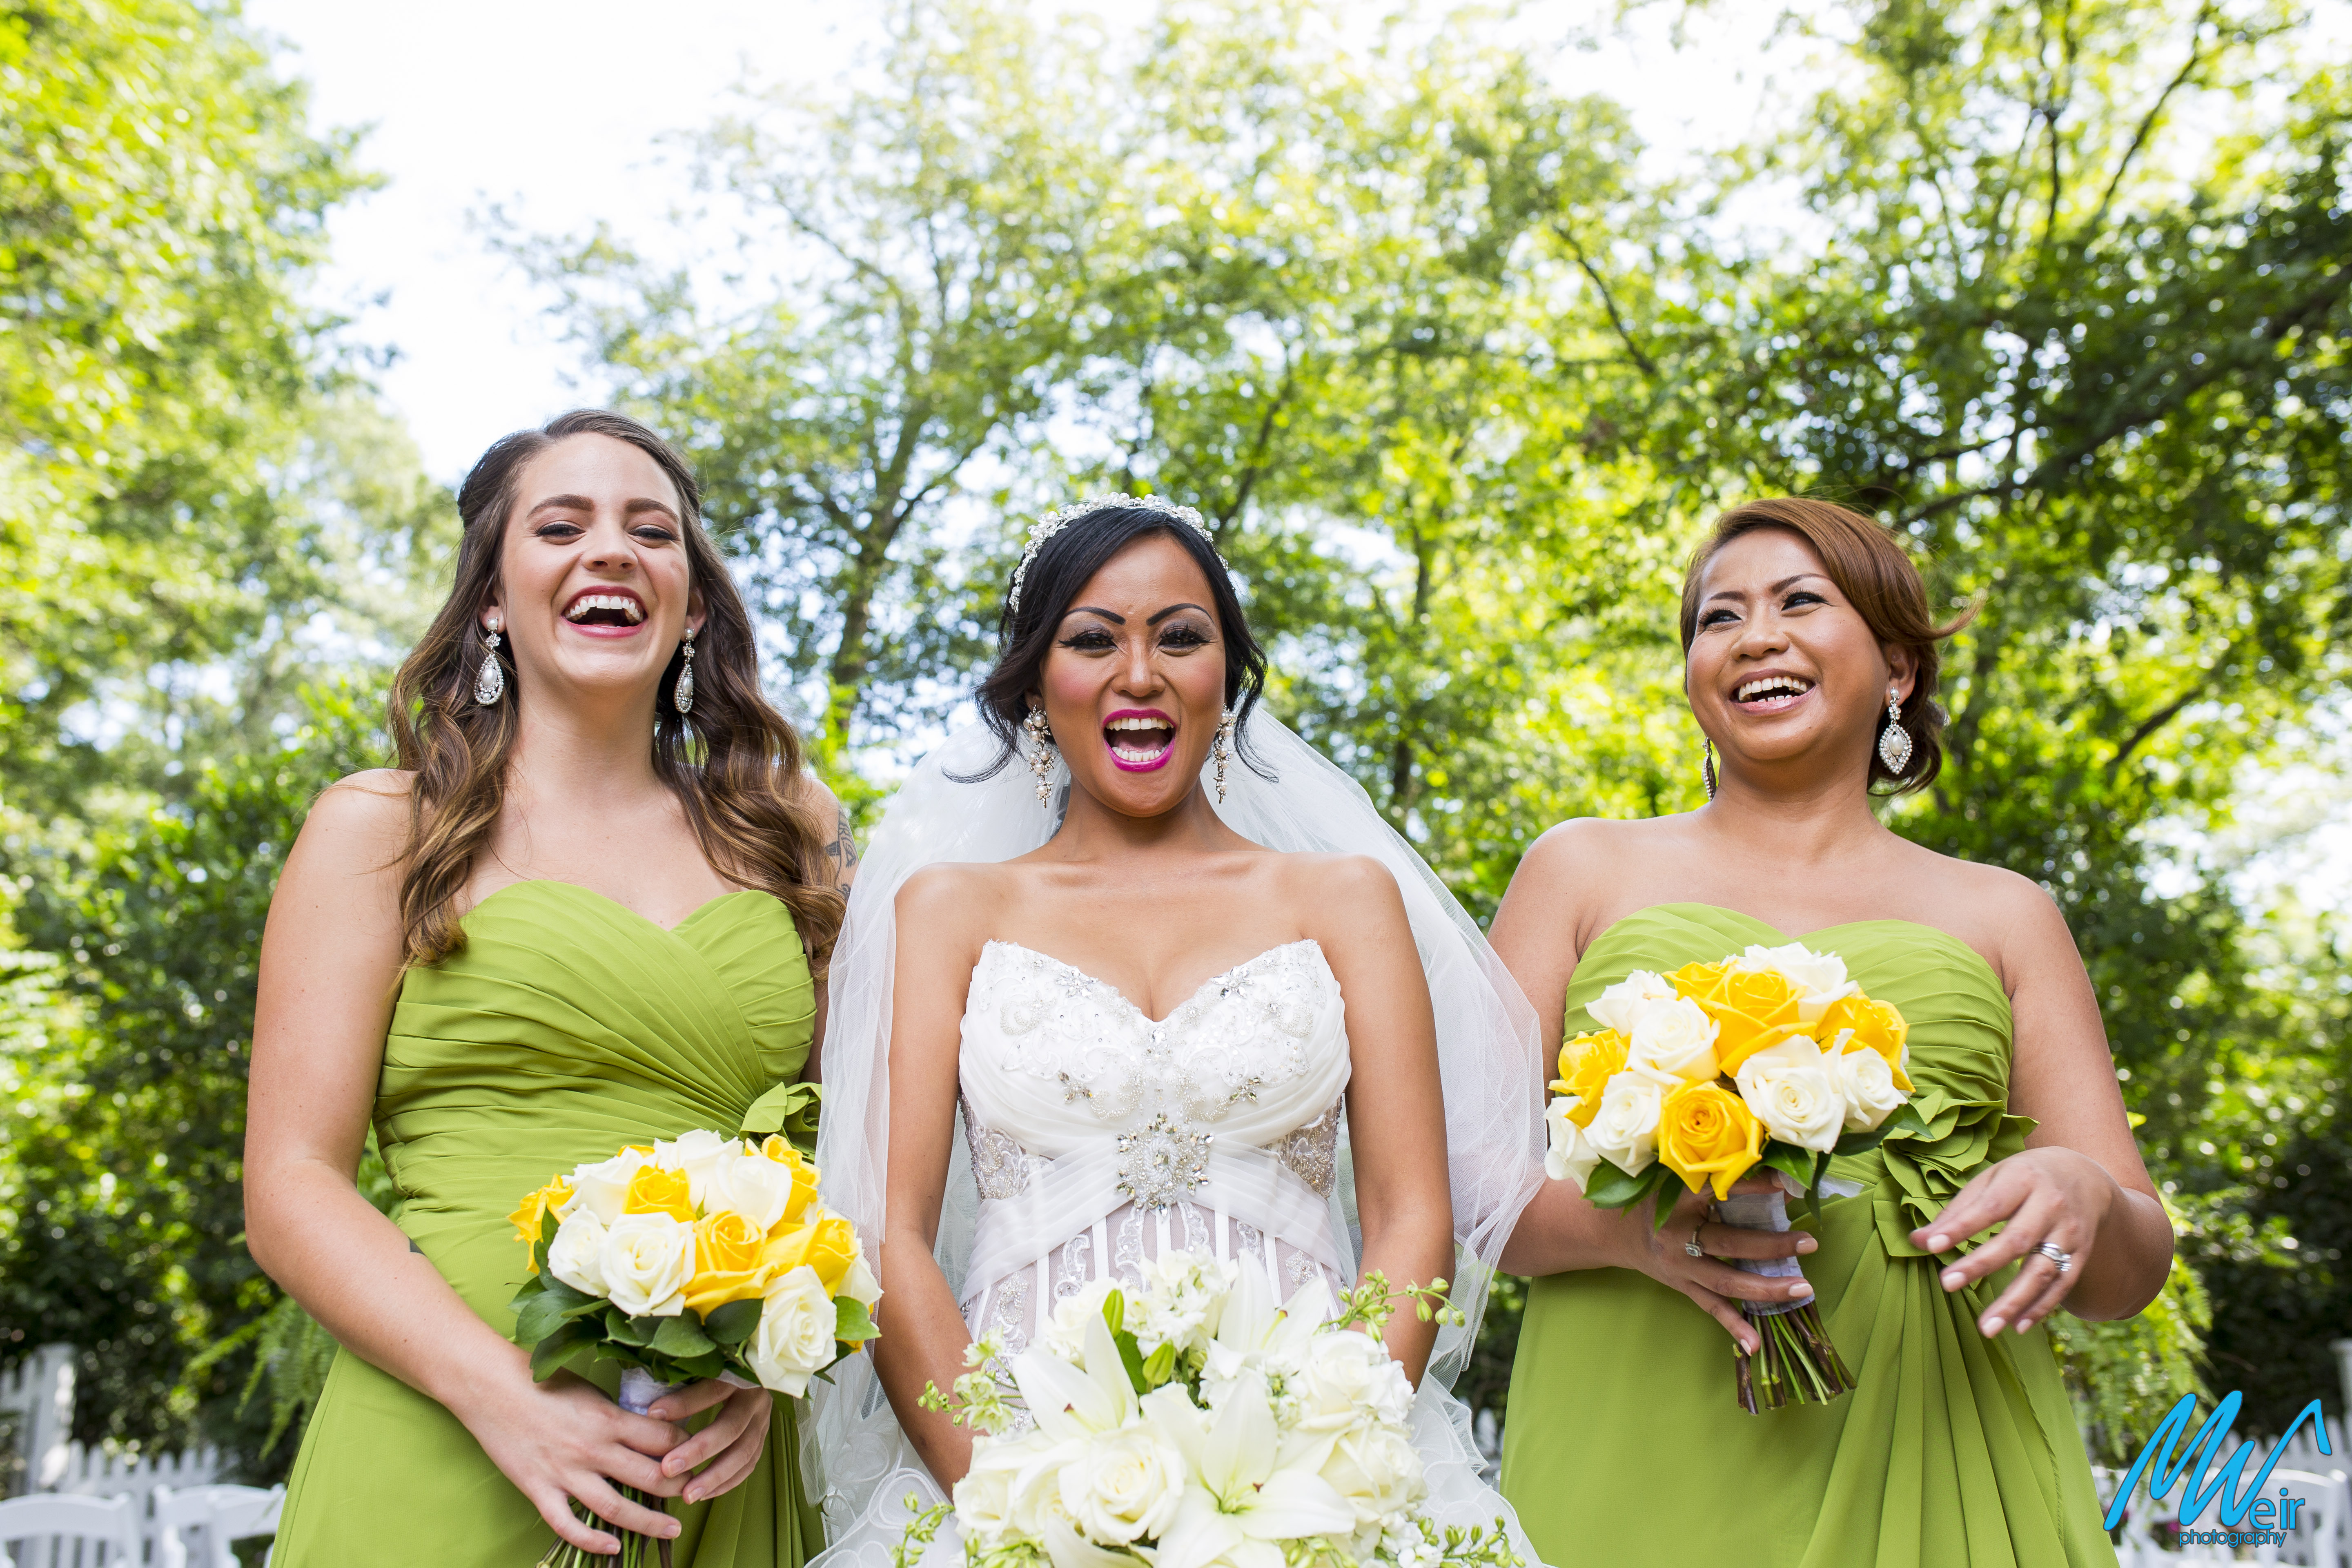 bride and her bridesmaids laughing together in a garden